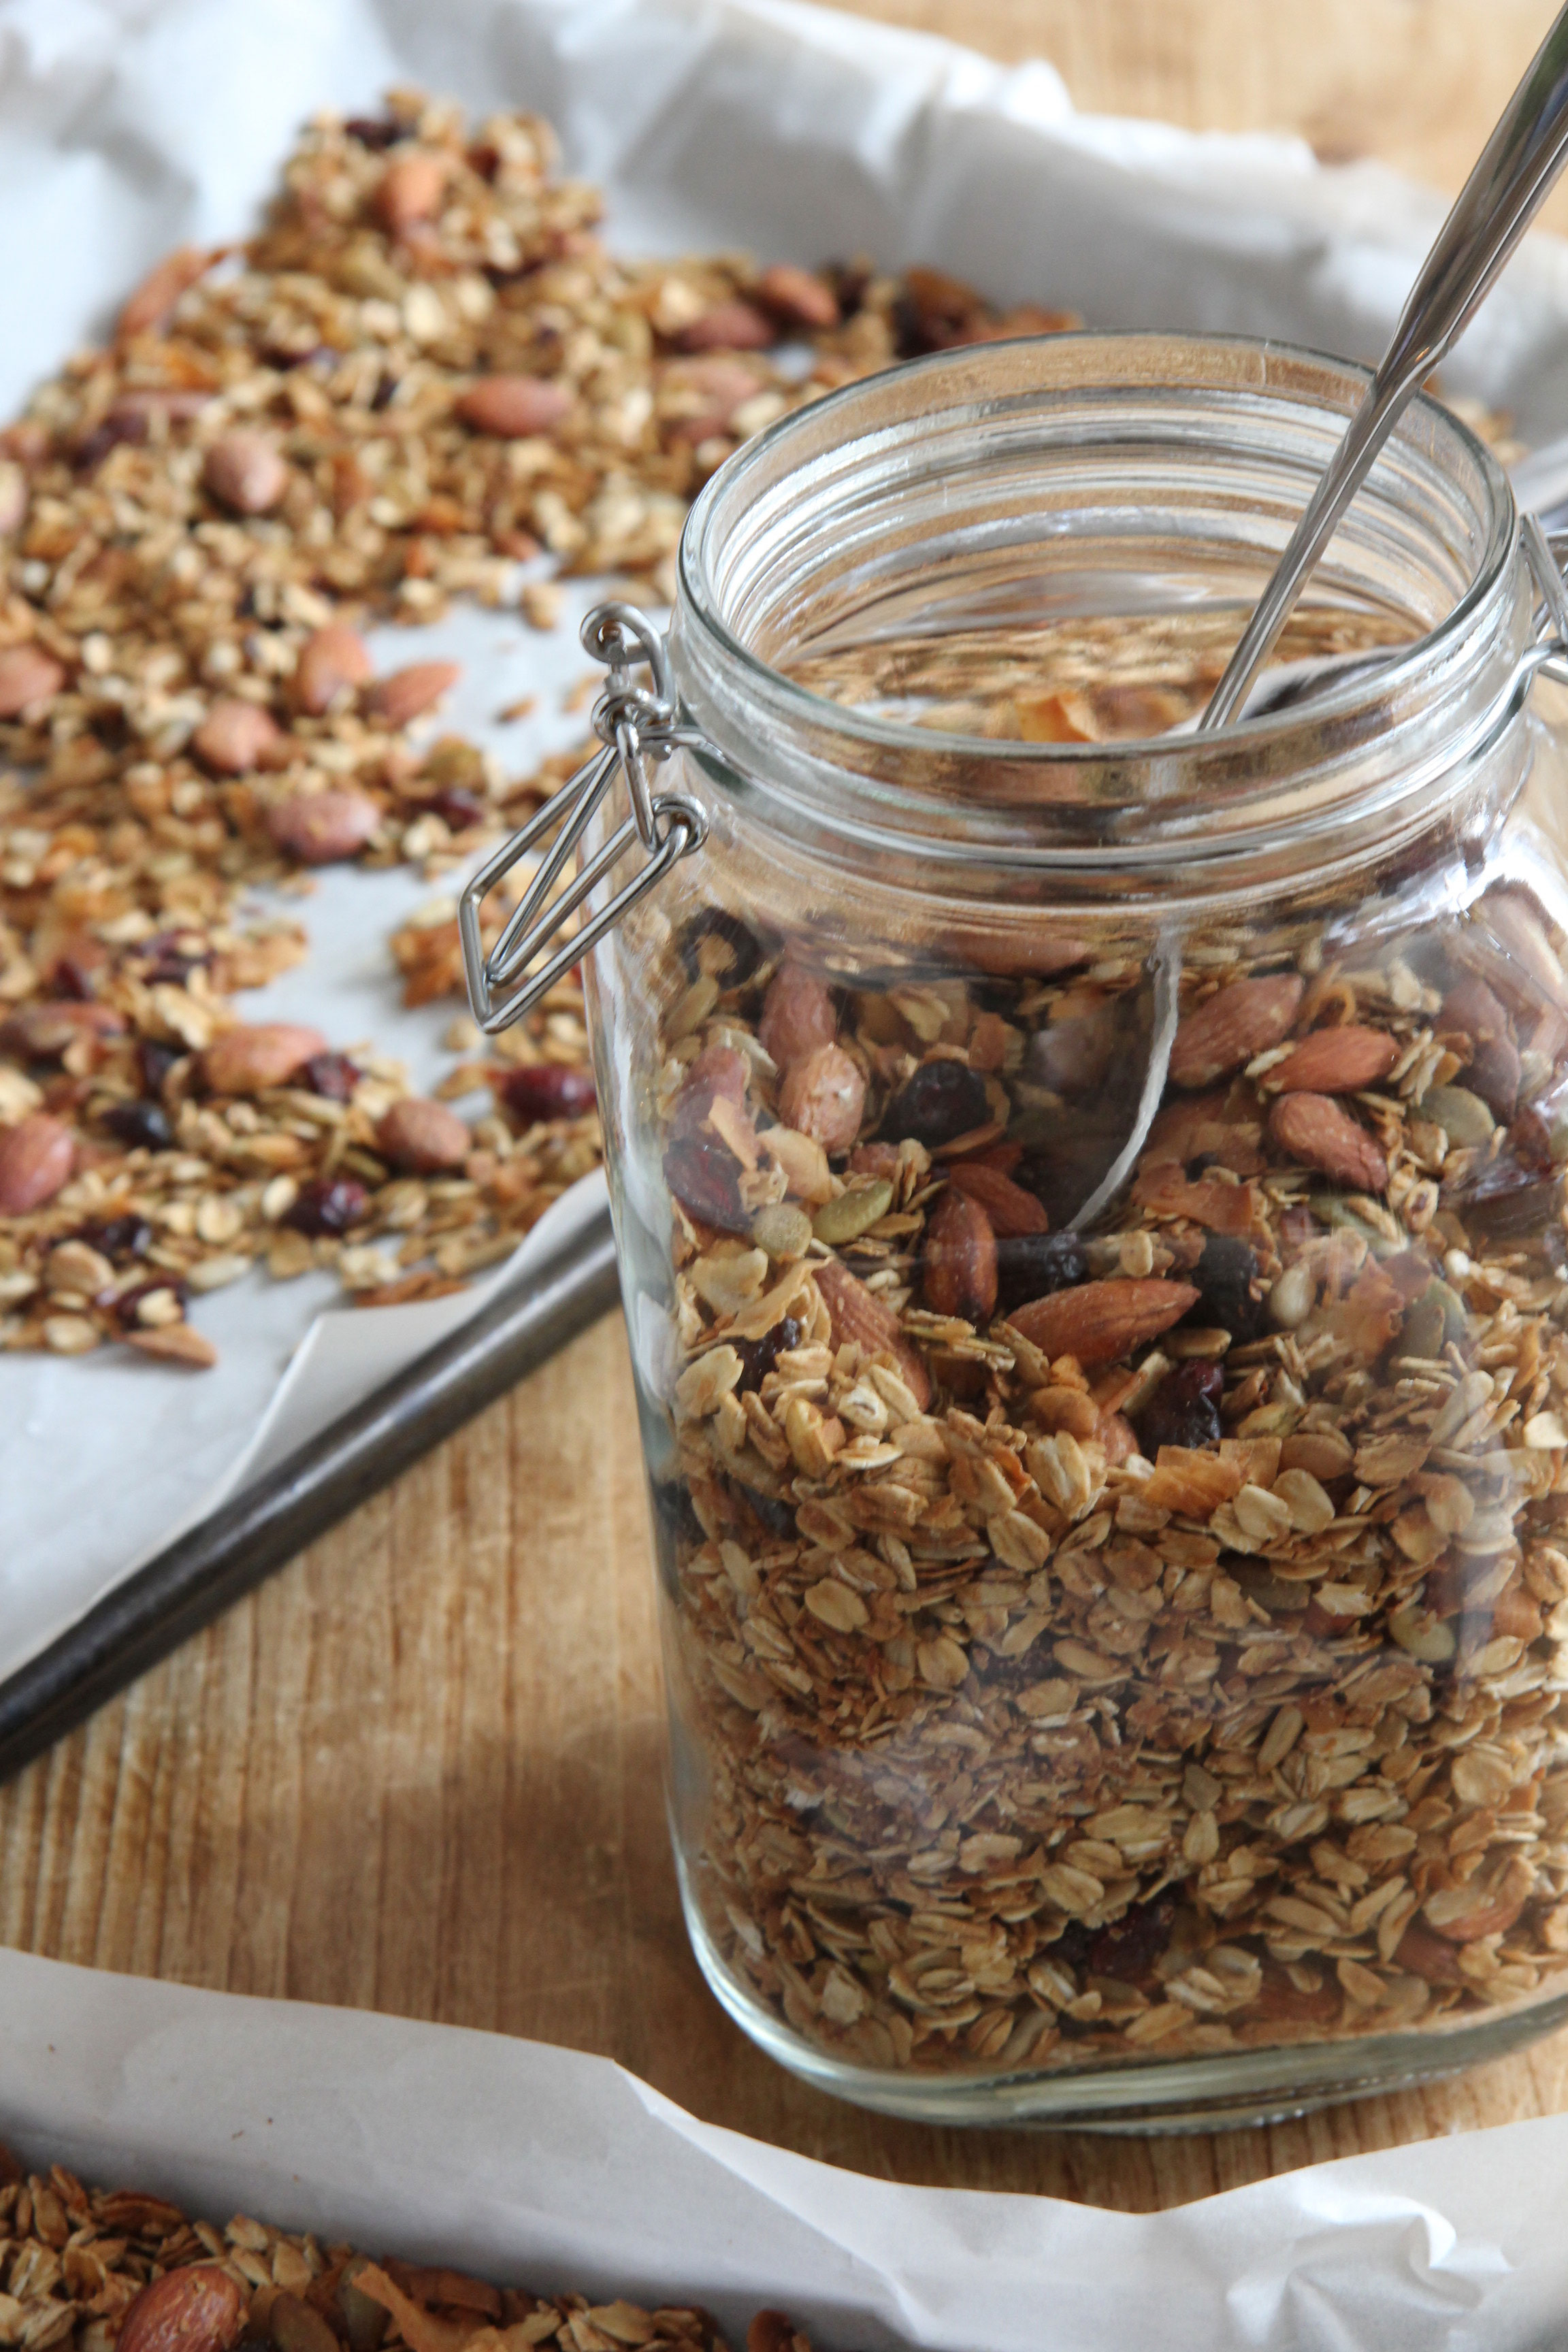 Making your own granola is super easy! Try this Homemade Gluten Free Granola recipe for your morning breakfast or a snack on the go! 